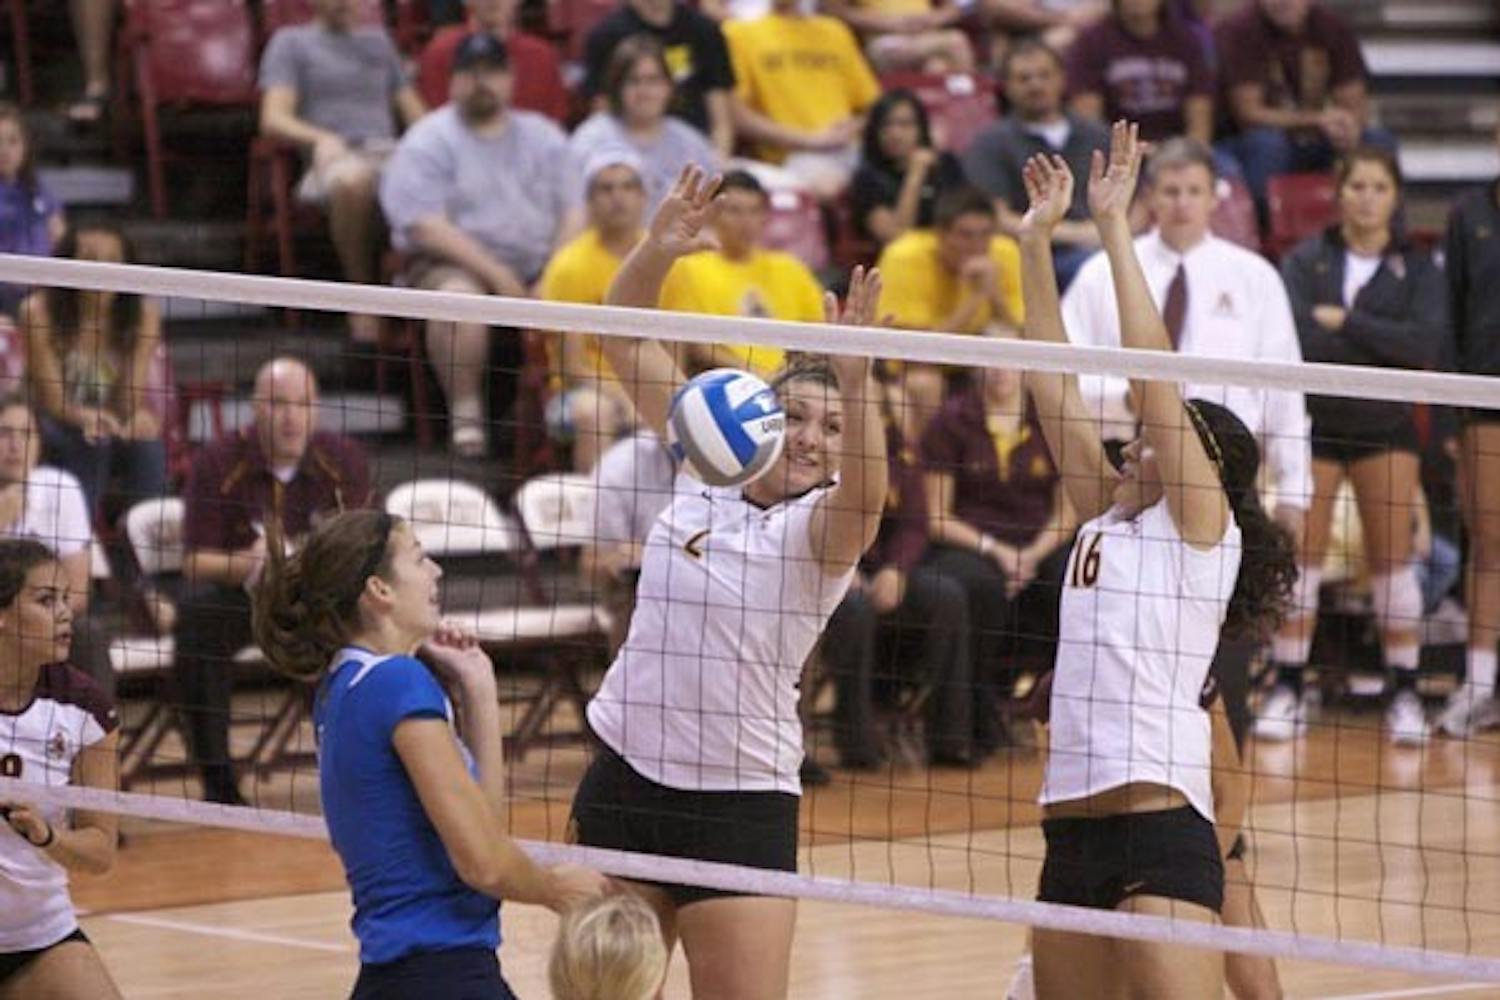 TAKE TWO: Junior middle blocker Sonja Markanovich (left) and freshman outside hitter Danica Mendivil jump for a block against UCLA on Oct. 16. After losing to UA in Tucson earlier this season, the Sun Devils get another chance when they hose their rival on Friday. (Photo by Scott Stuk)